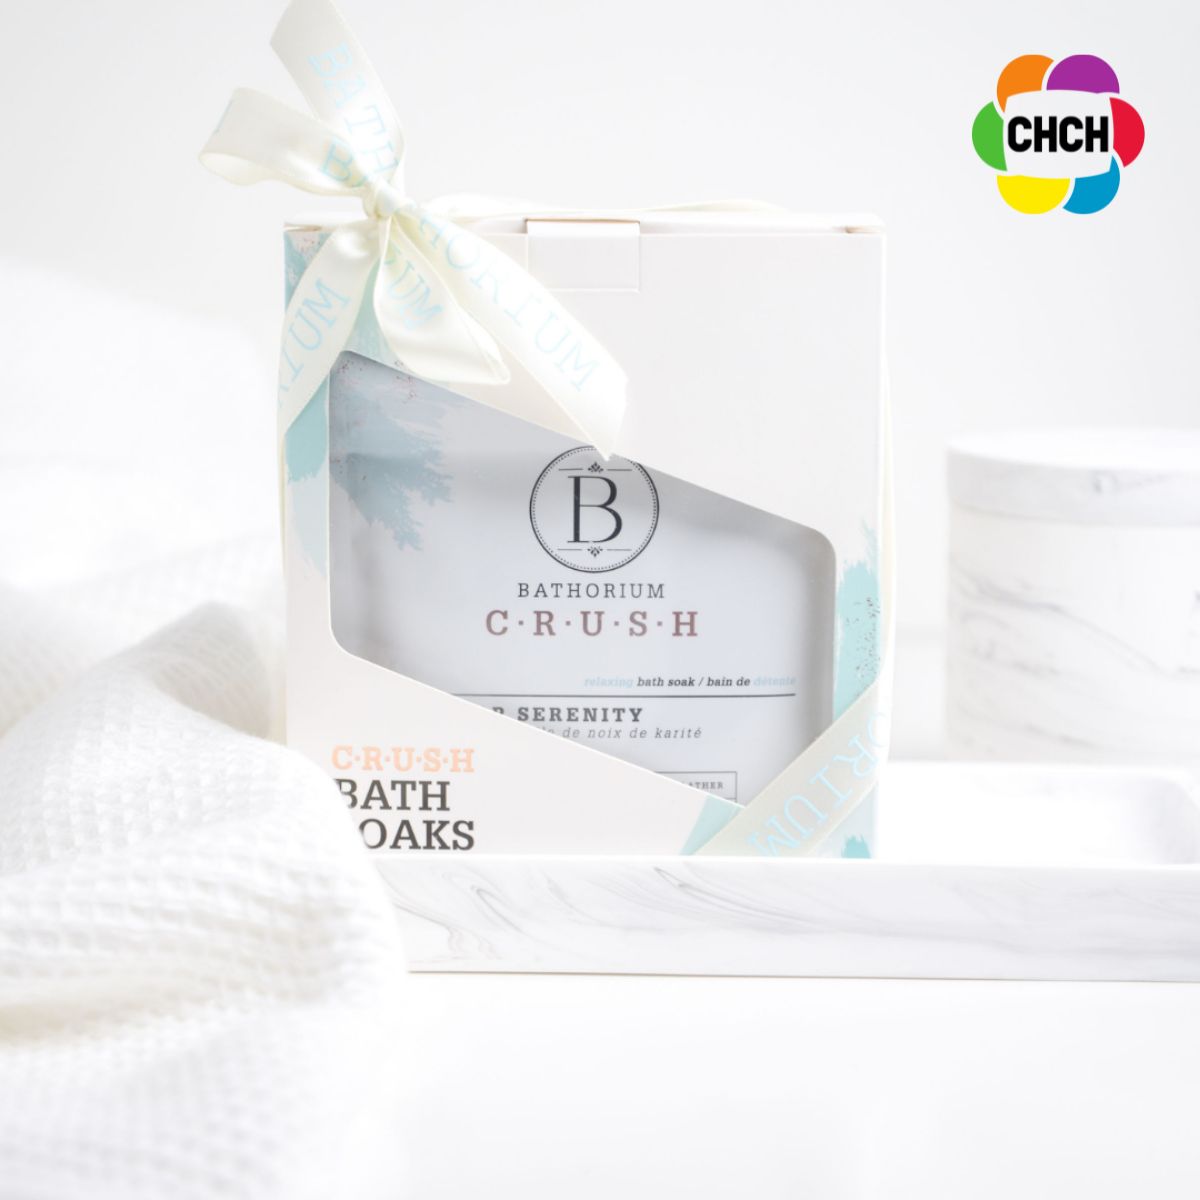 CHCH News: Gift your host or hostess with a bath recovery kit